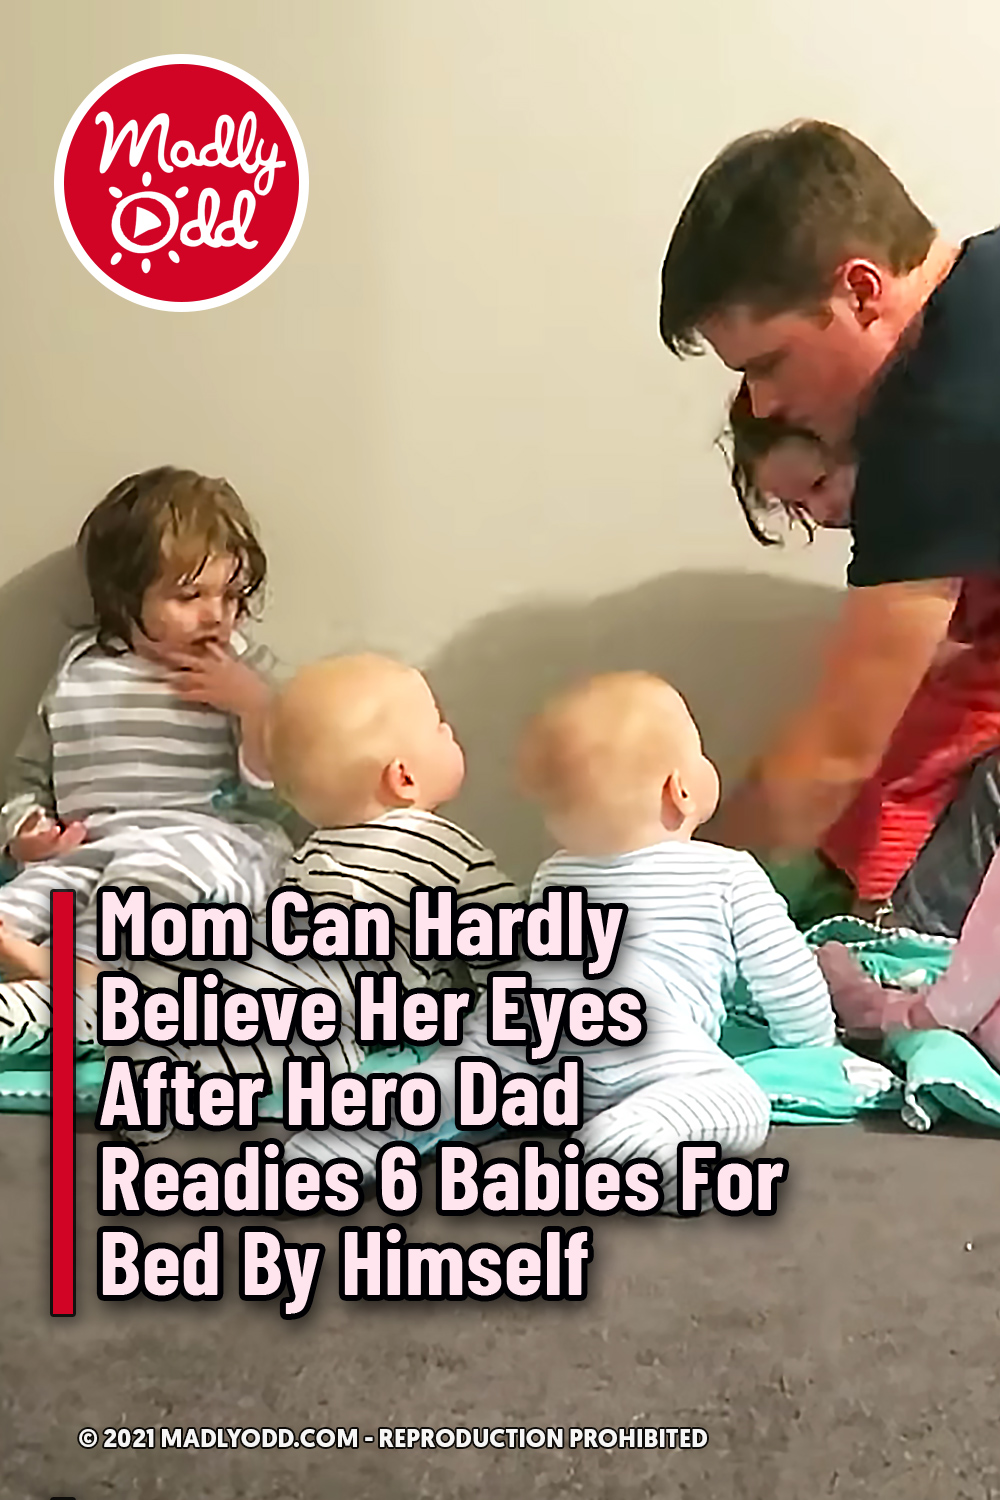 Mom Can Hardly Believe Her Eyes After Hero Dad Readies 6 Babies For Bed By Himself